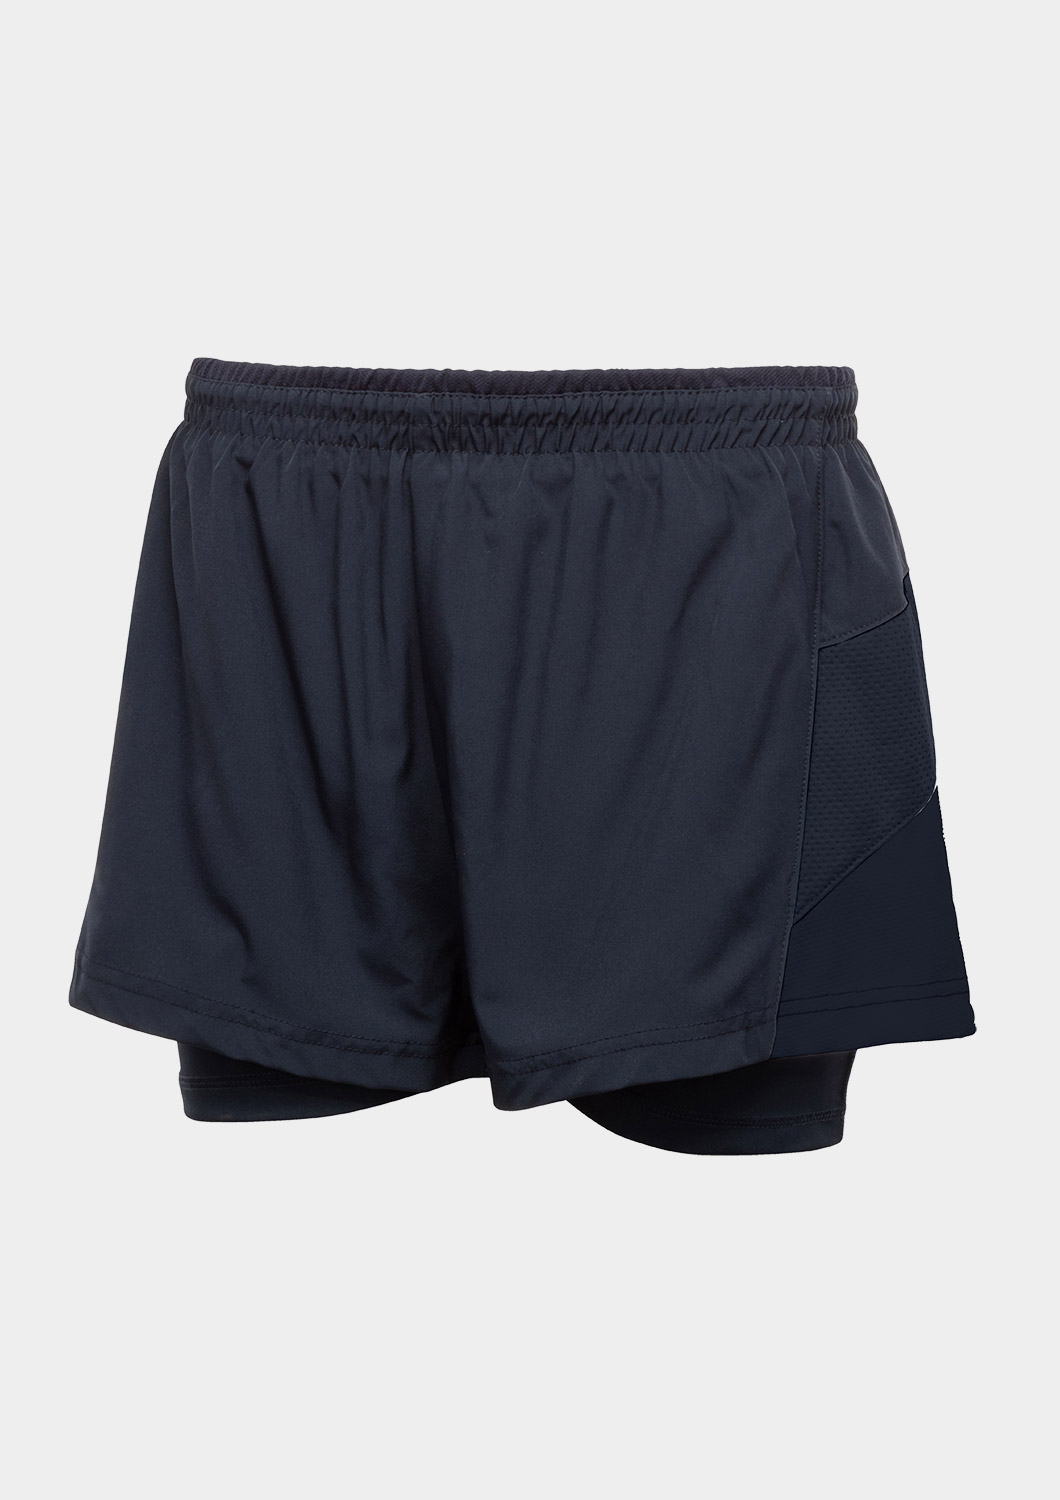 Navy 2 in 1 Shorts - Taylor Made Uniforms